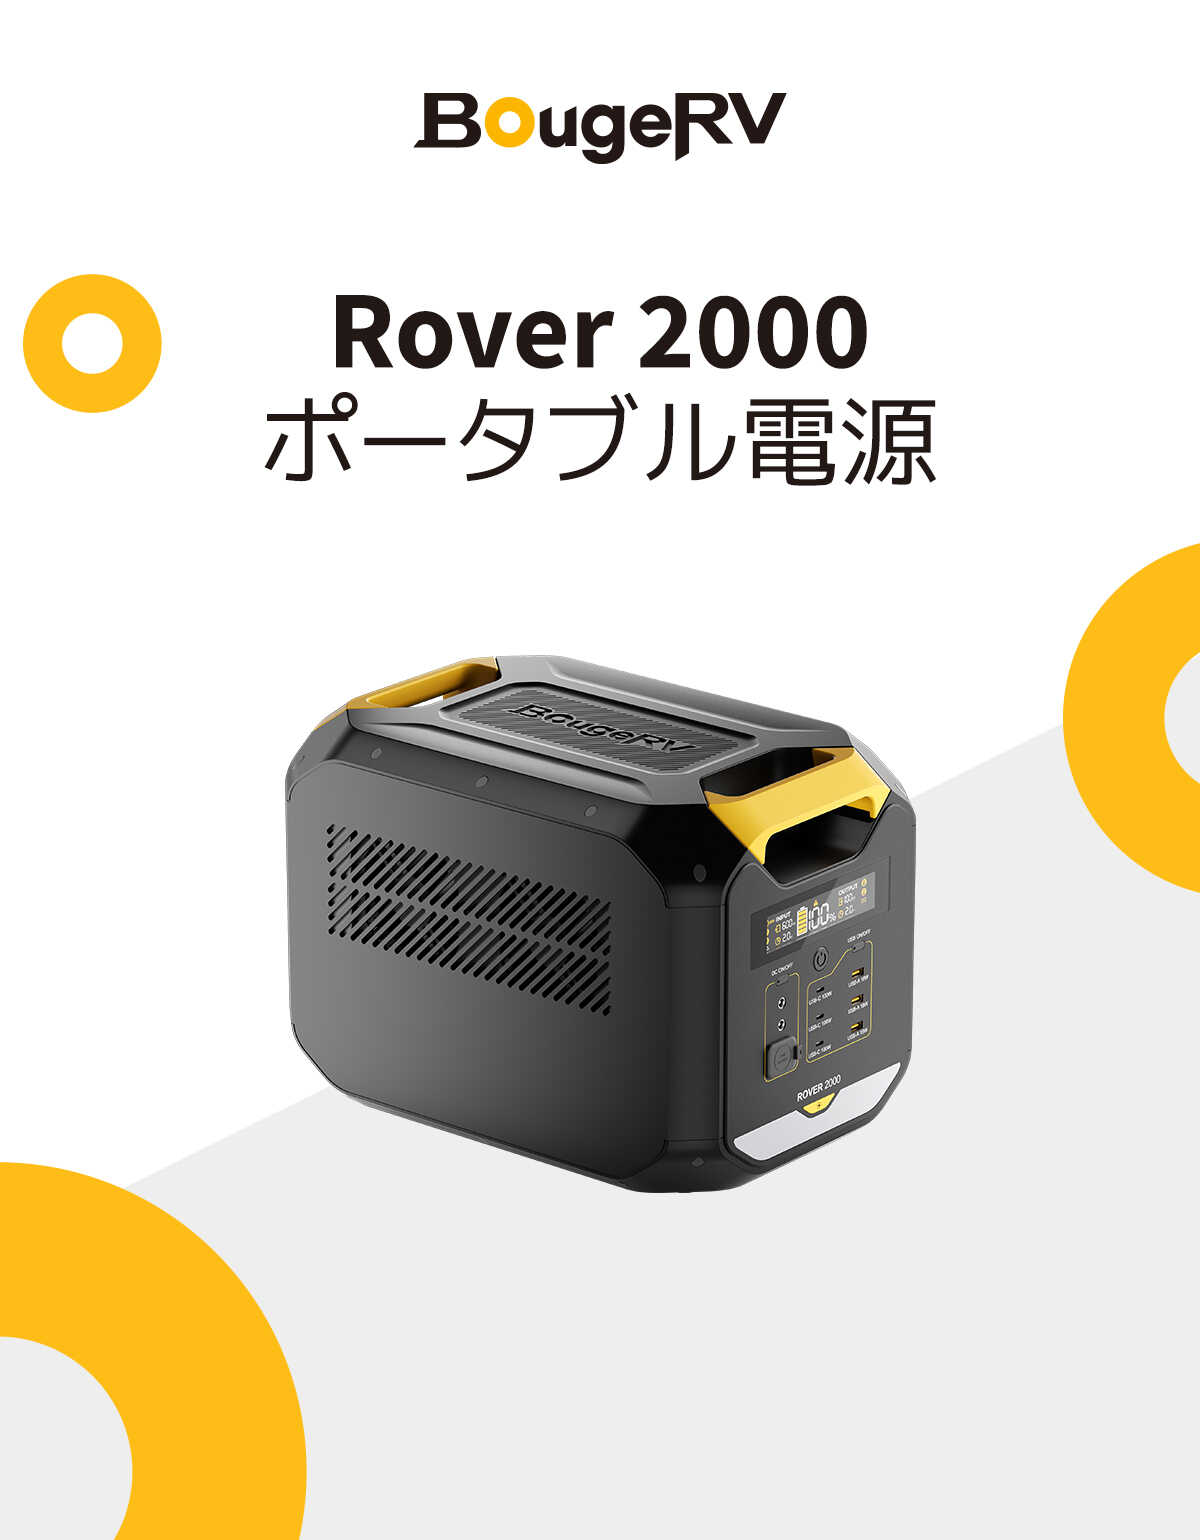 BougeRV Rover 2000 ポータブル電源